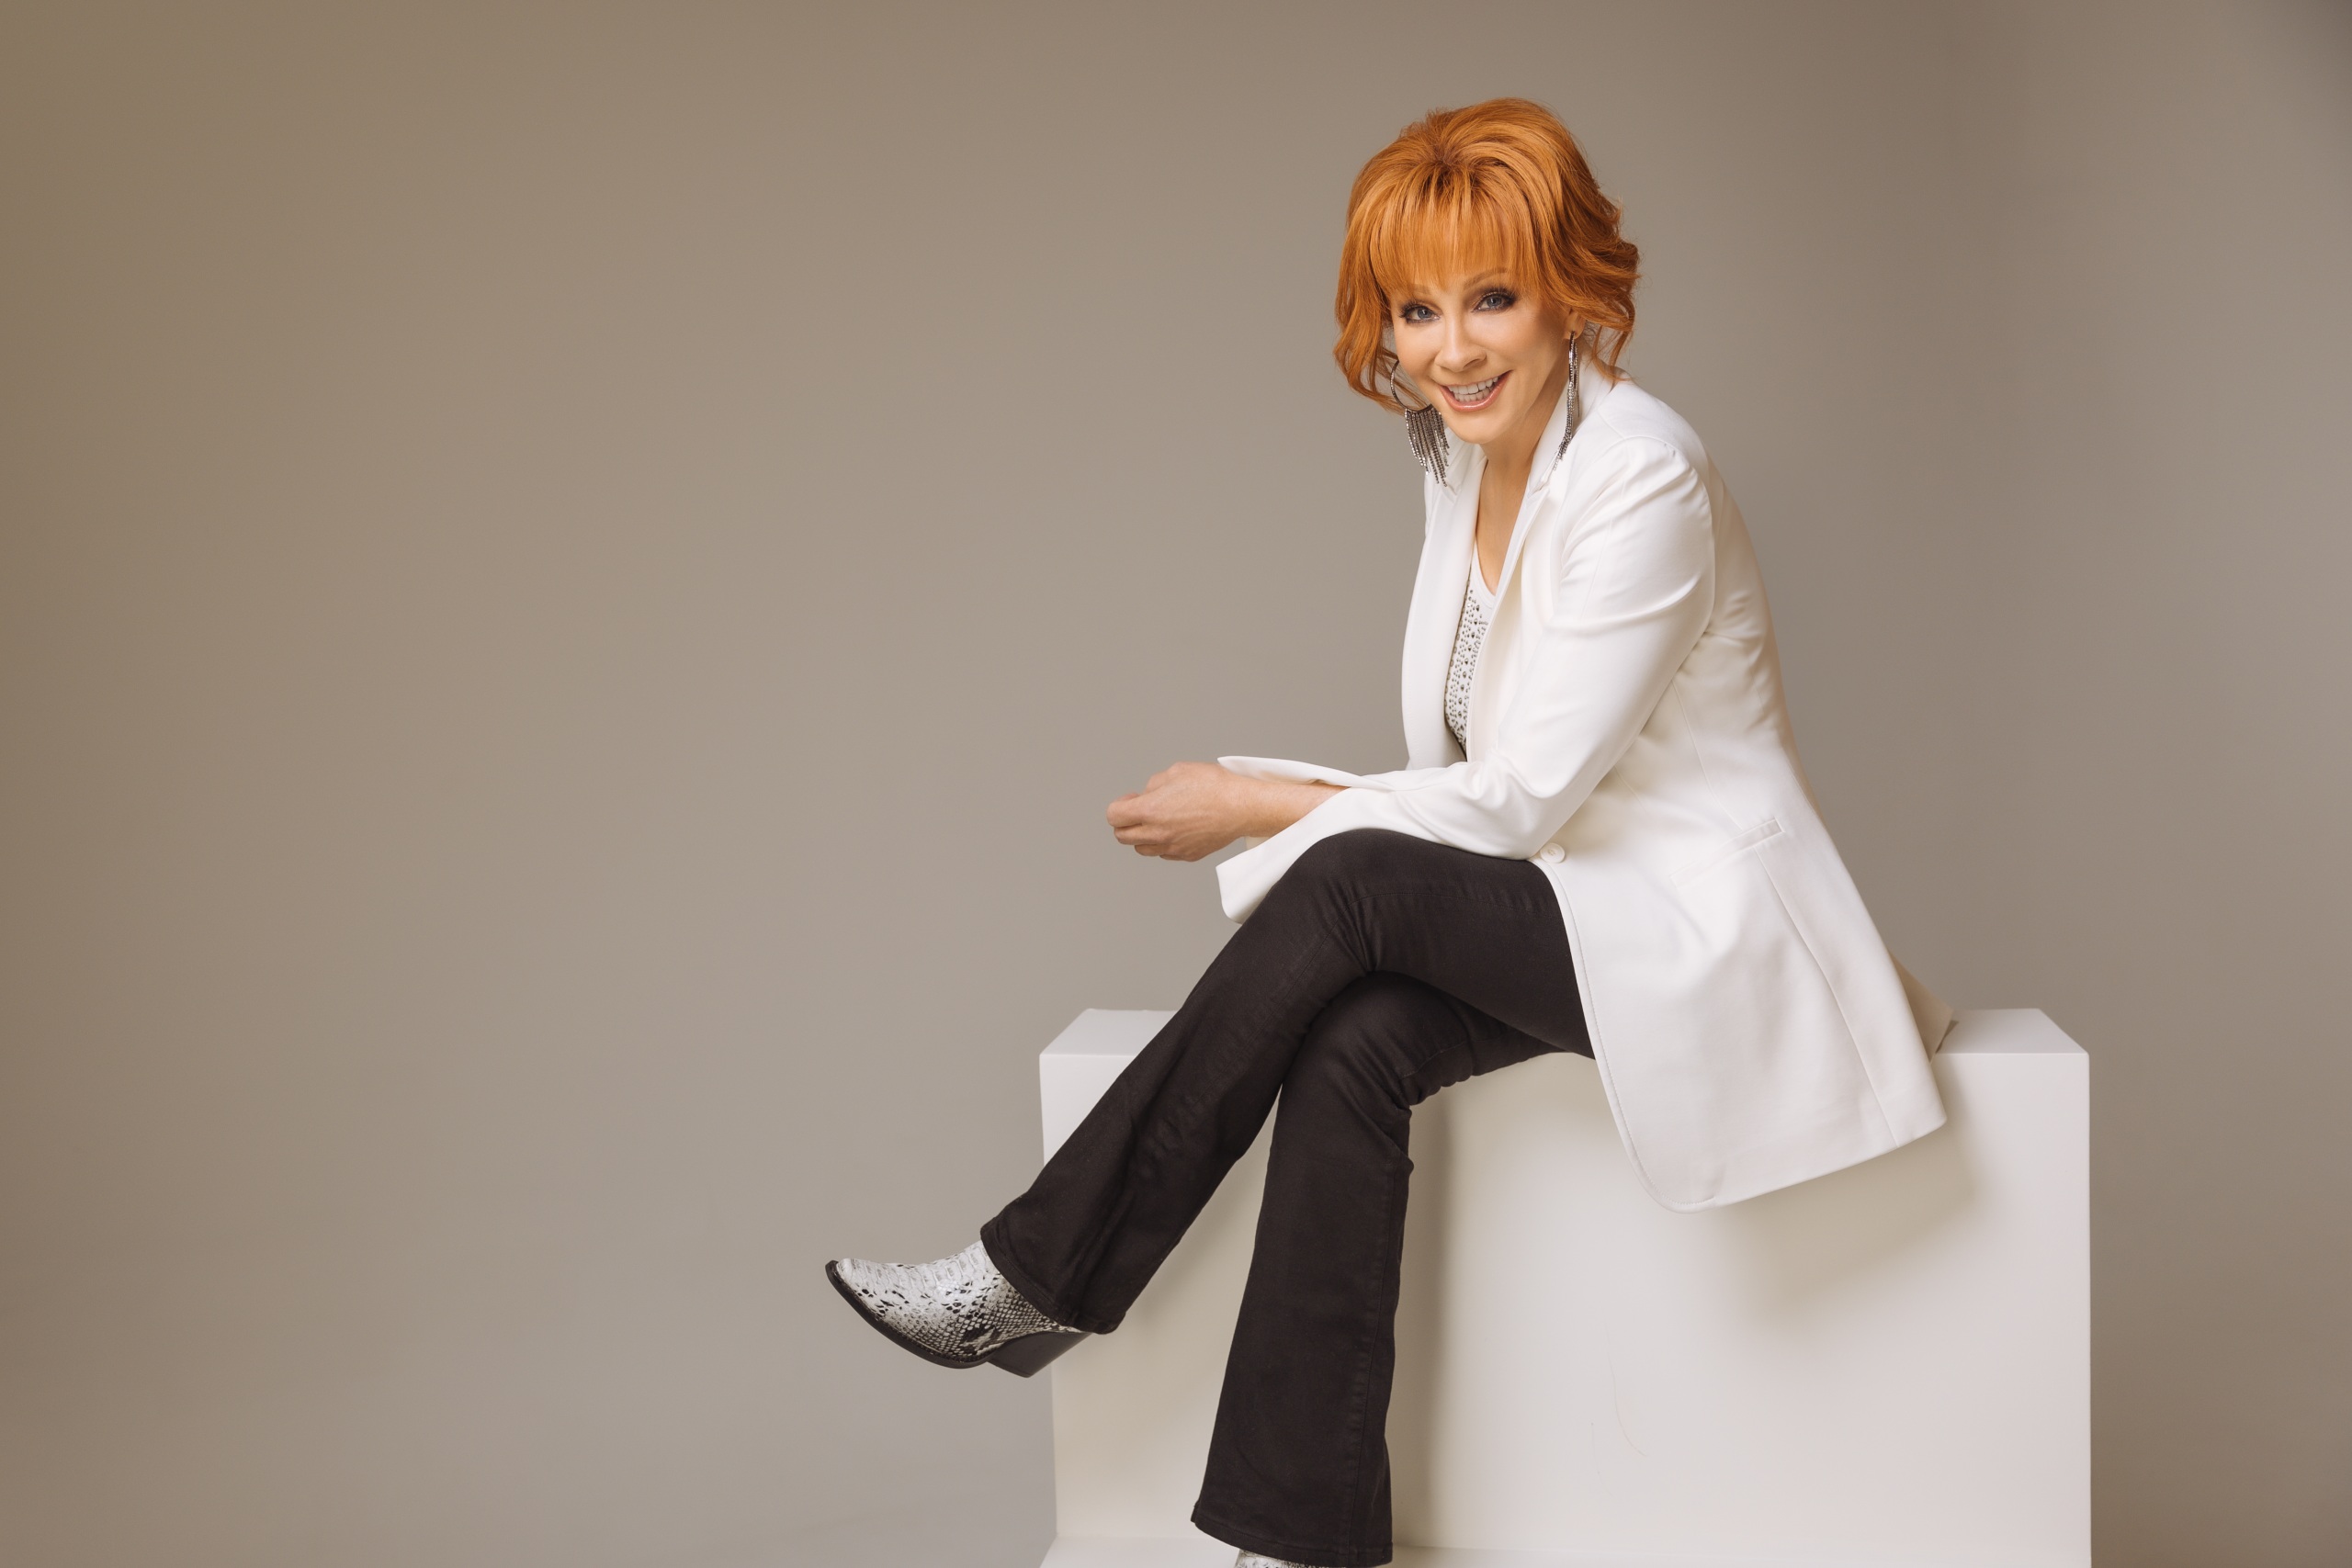 REBA McENTIRE BRINGS THE FIRE AND THE RAIN TO THE VOICE.